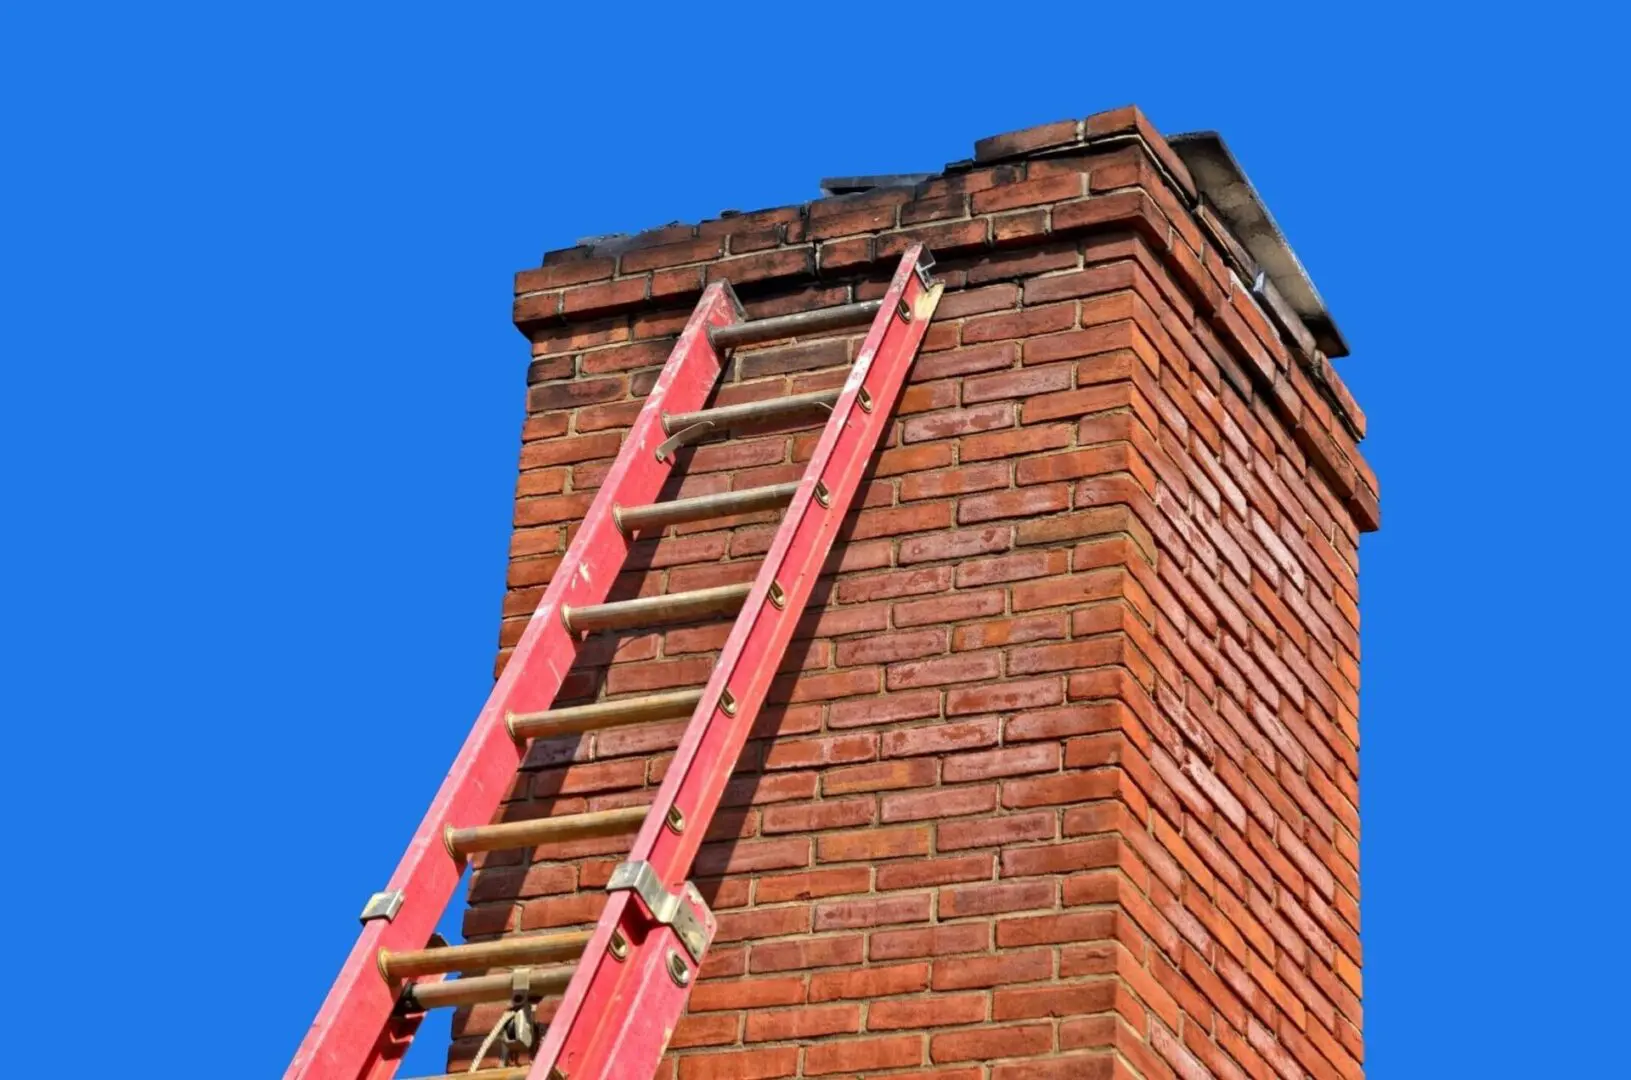 A ladder is attached to the side of a brick chimney.